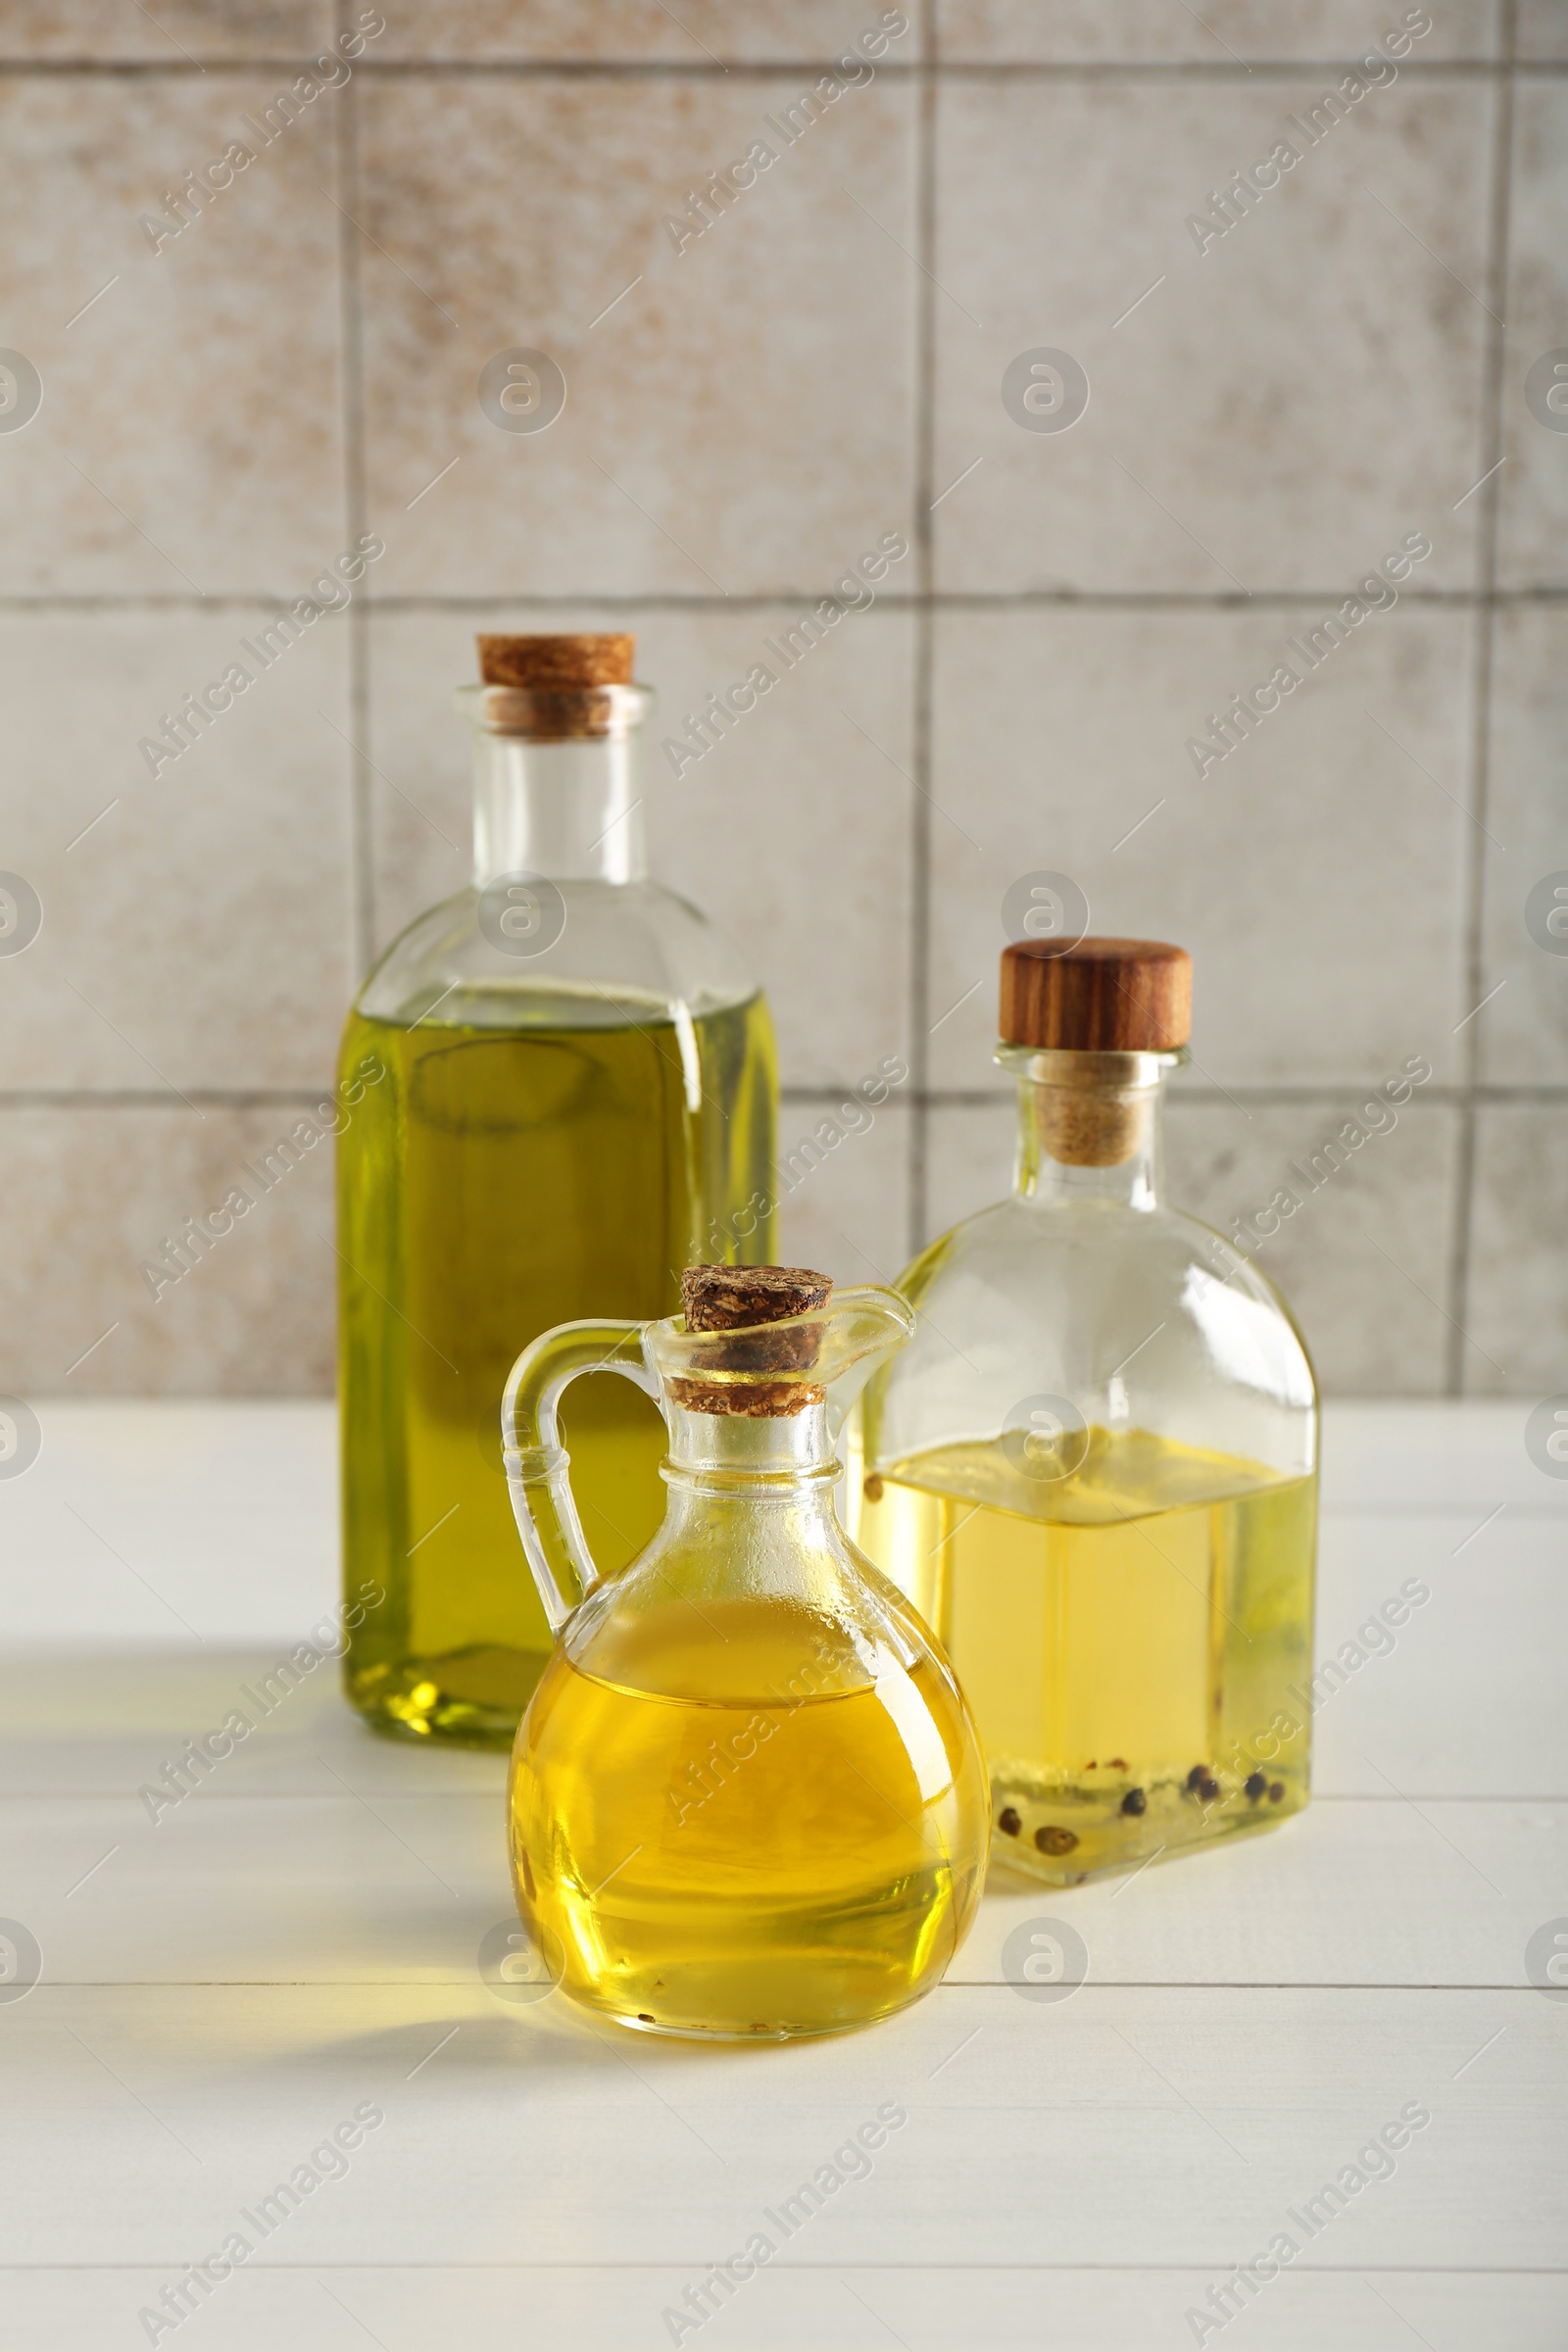 Photo of Vegetable fats. Different oils in glass bottles on white wooden table against tiled wall